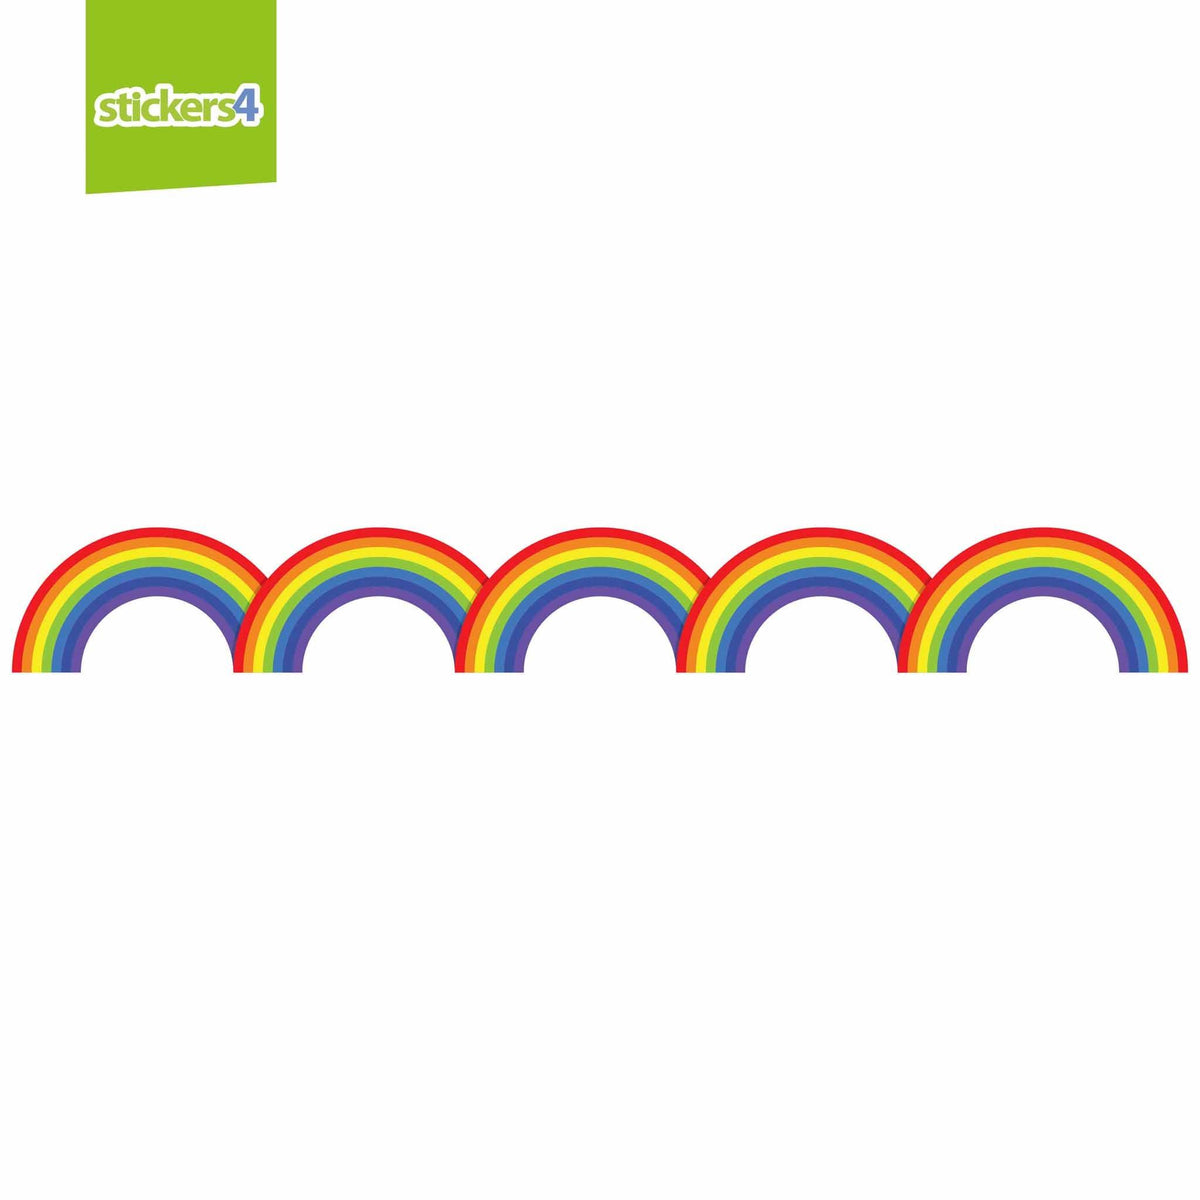 Rainbow Border Window Cling Sticker Perfect Anytime